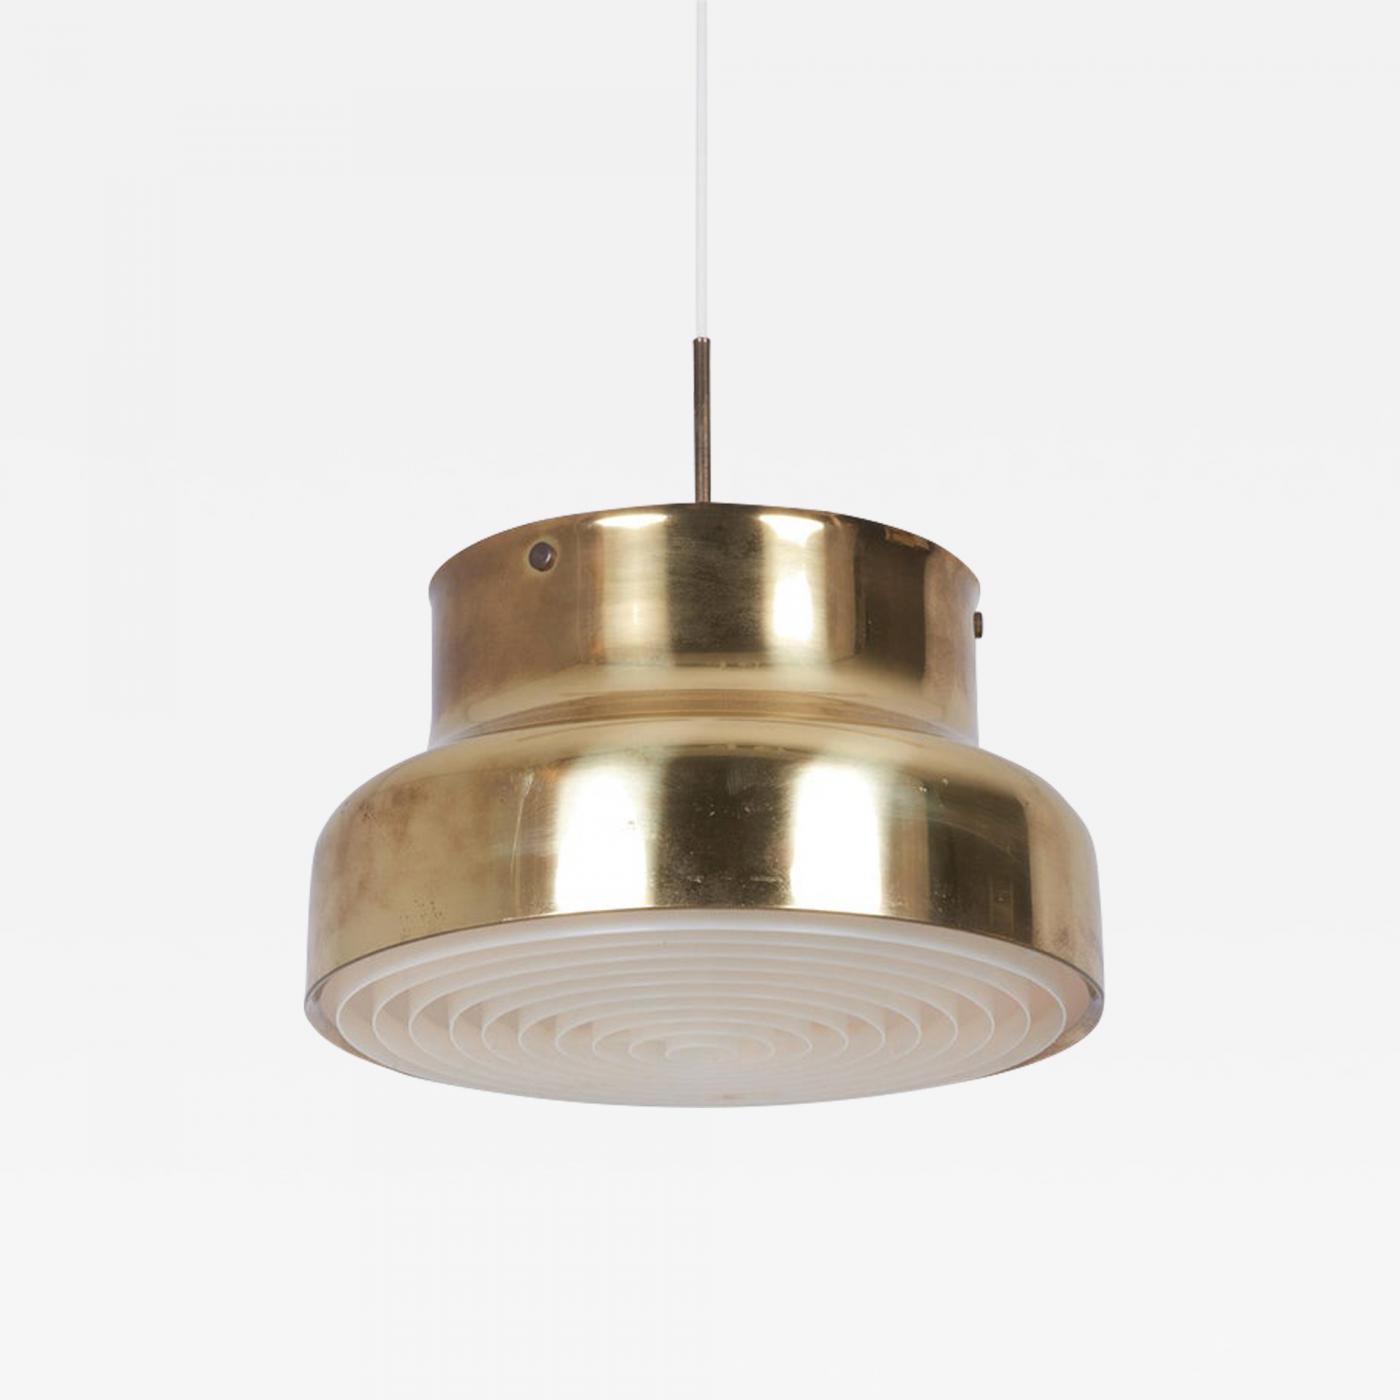 Anders Pehrson - Ceiling Lamp Bumling in Brass by Pehrson for Ateljé Lyktan